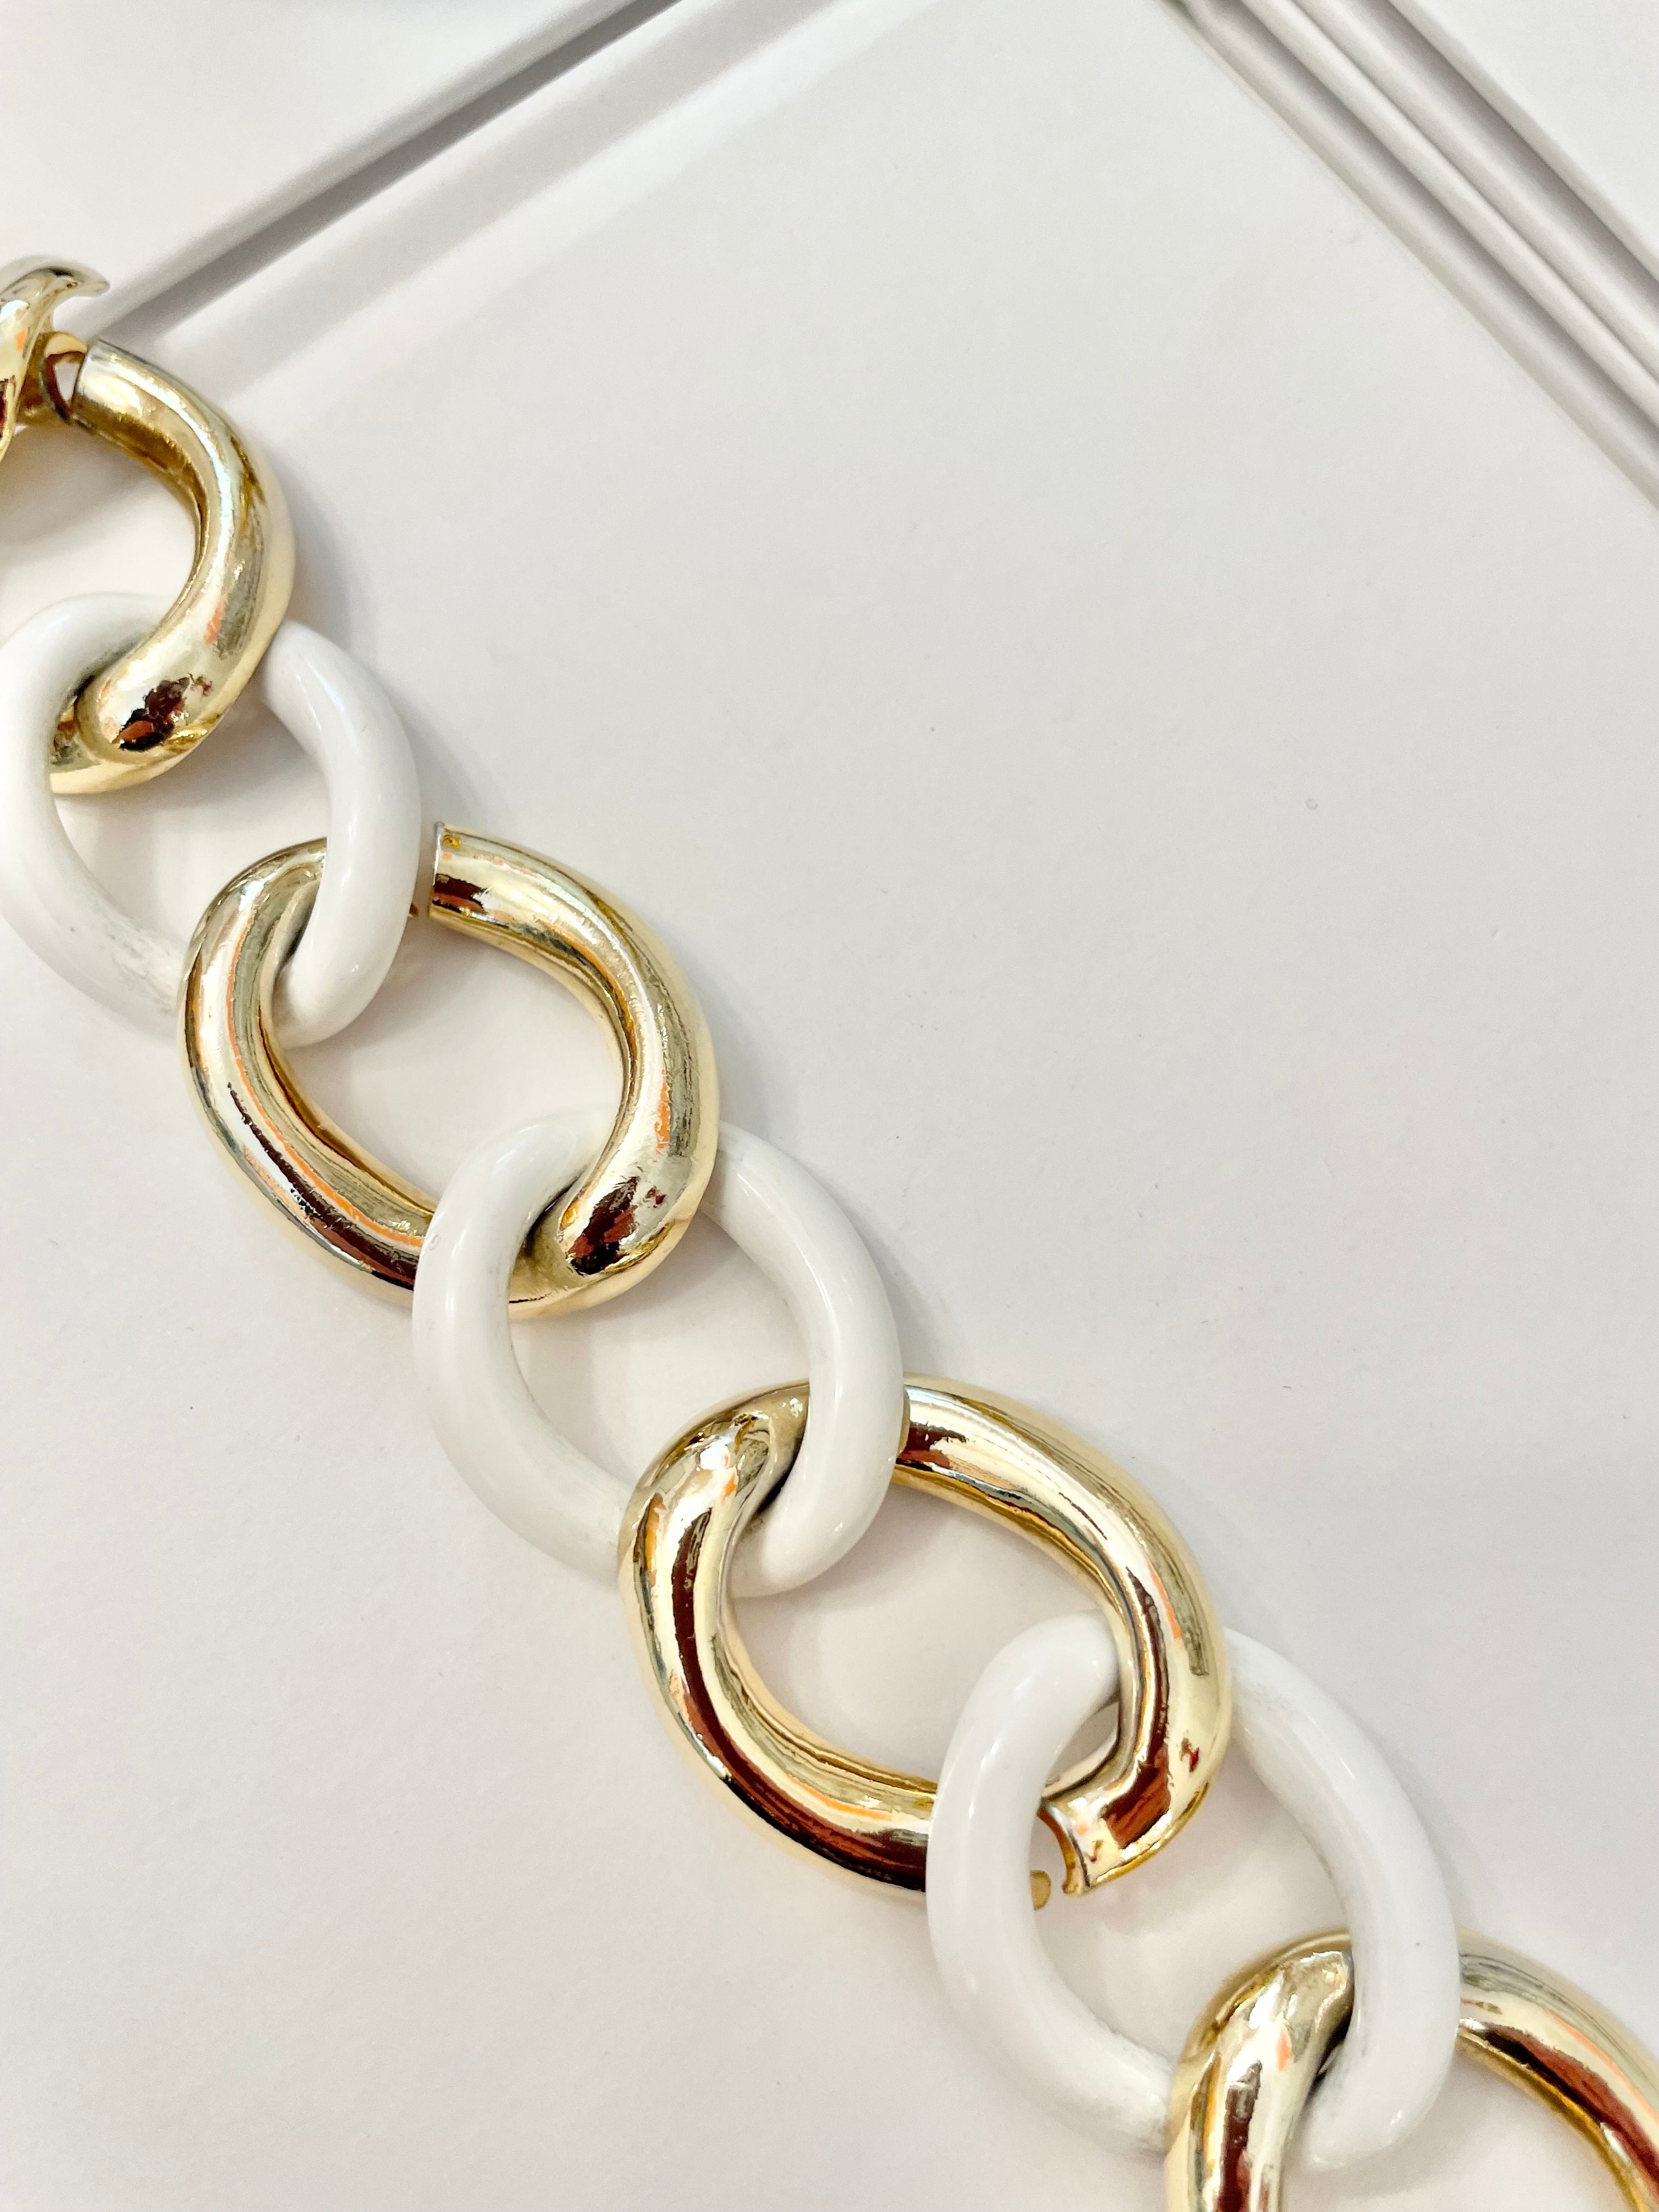 Vintage Kenneth Jay Lane classic white and gold chainlink bracelet...so classy